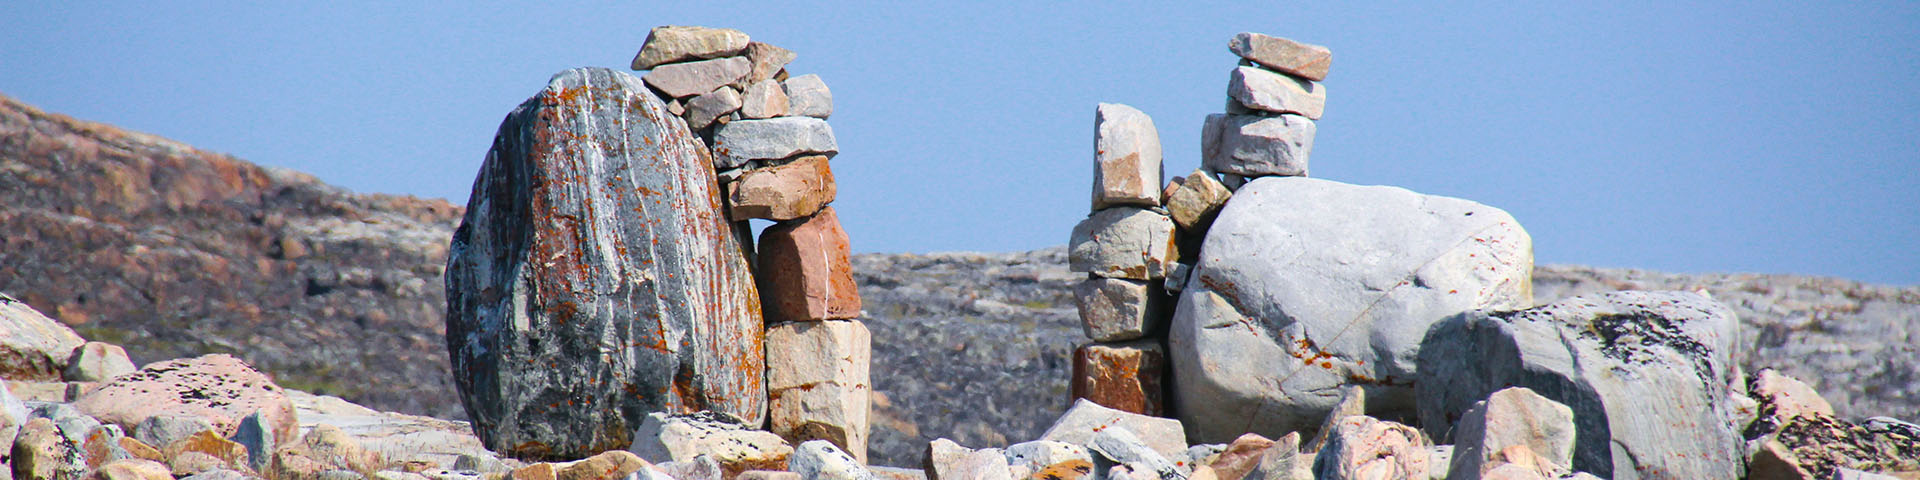 Two archaeological rock structures on a rocky landscape. 